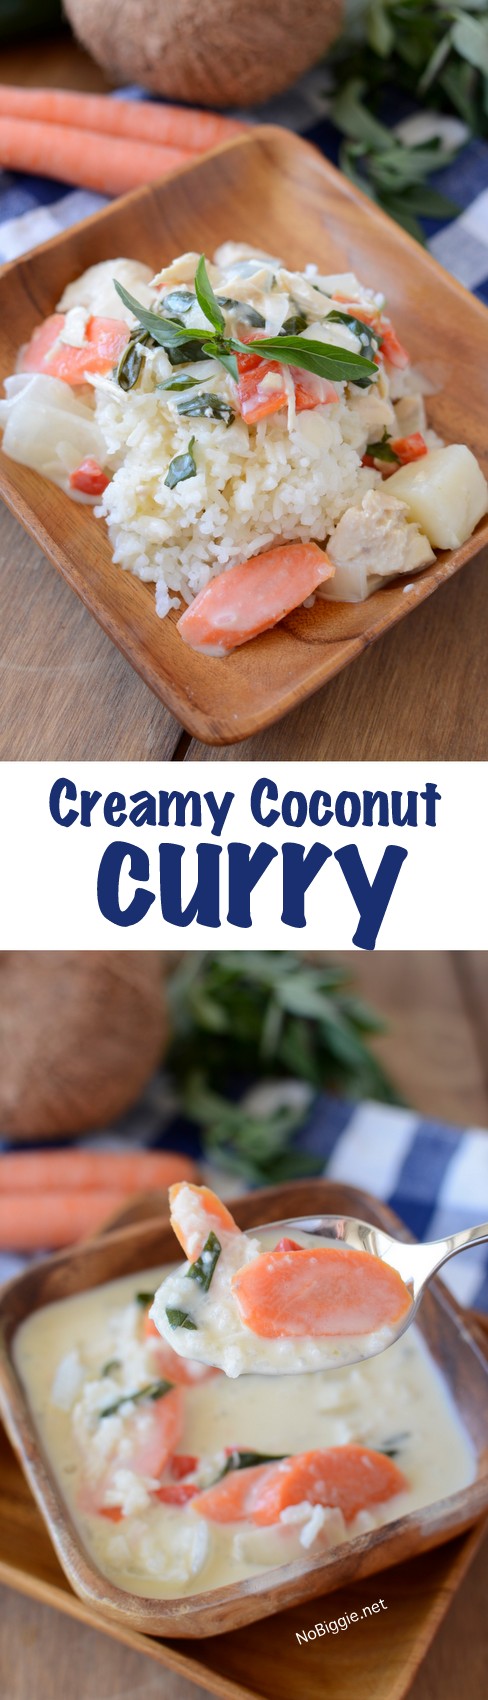 http://www.nobiggie.net/wp-content/uploads/2015/11/creamy-coconut-curry-this-recipe-is-just-like-eating-out-and-so-easy-NoBiggie.net_.jpg